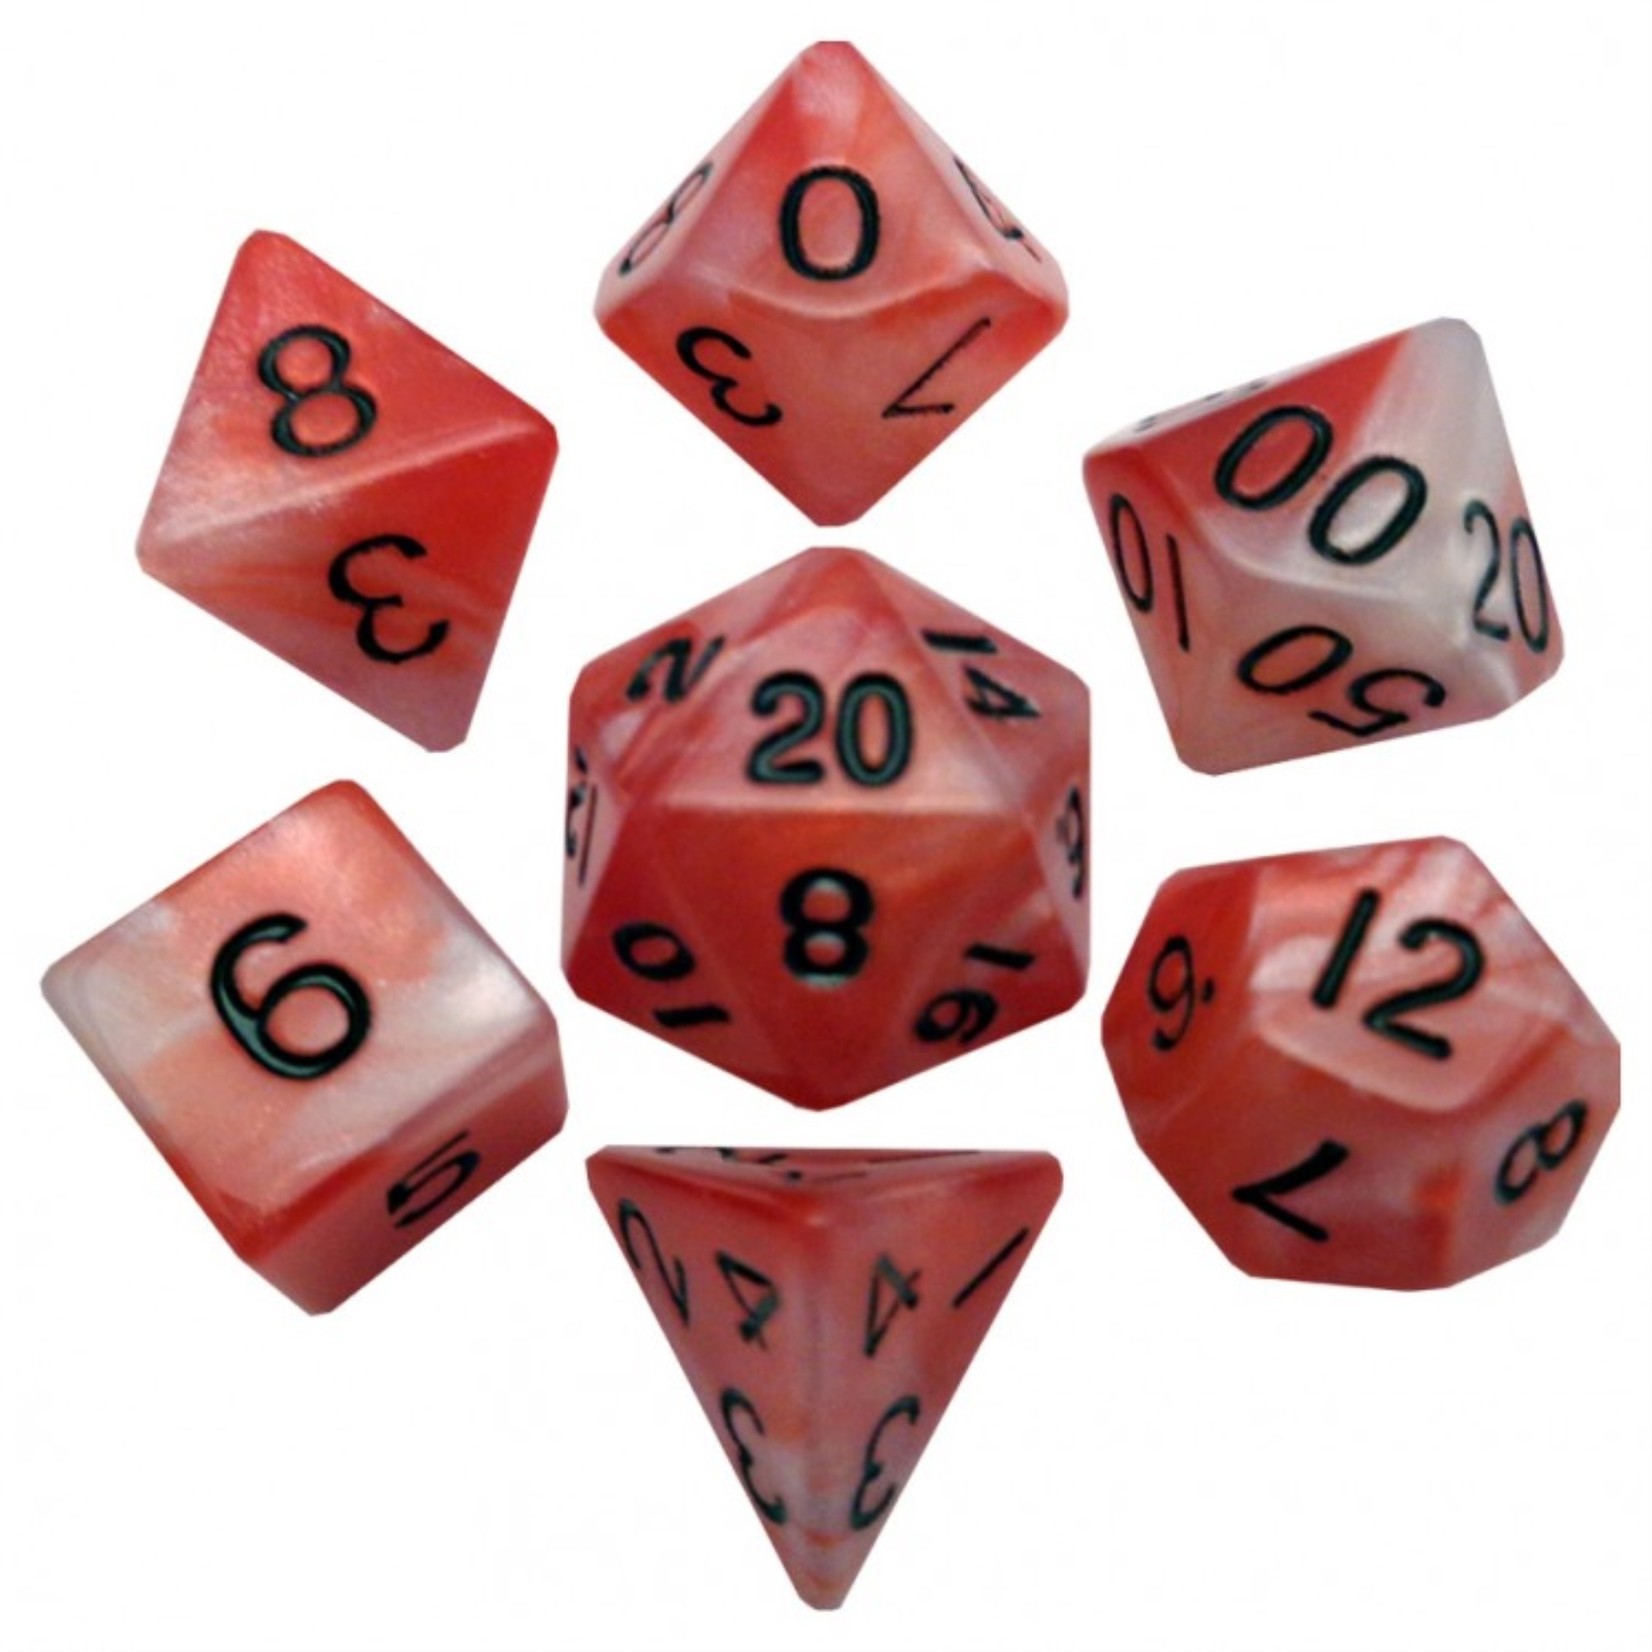 Metallic Dice Games 110 Combo Attack Red-White with Black 7-Set